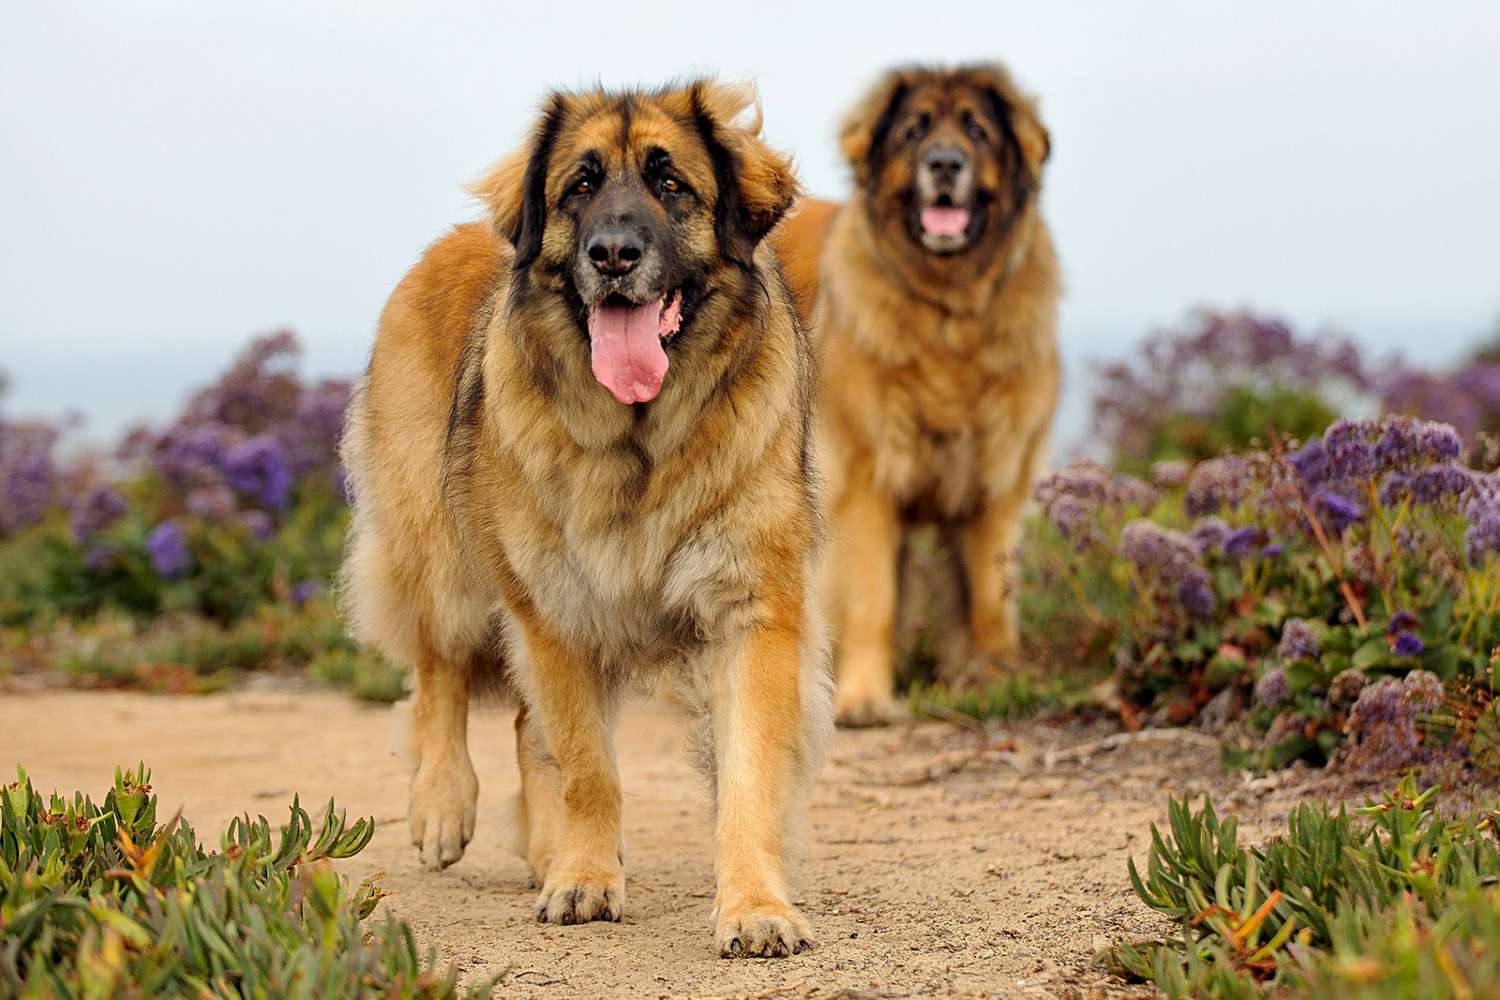 two leonberger dogs walking through a sandy trail between bushes of purple flowers